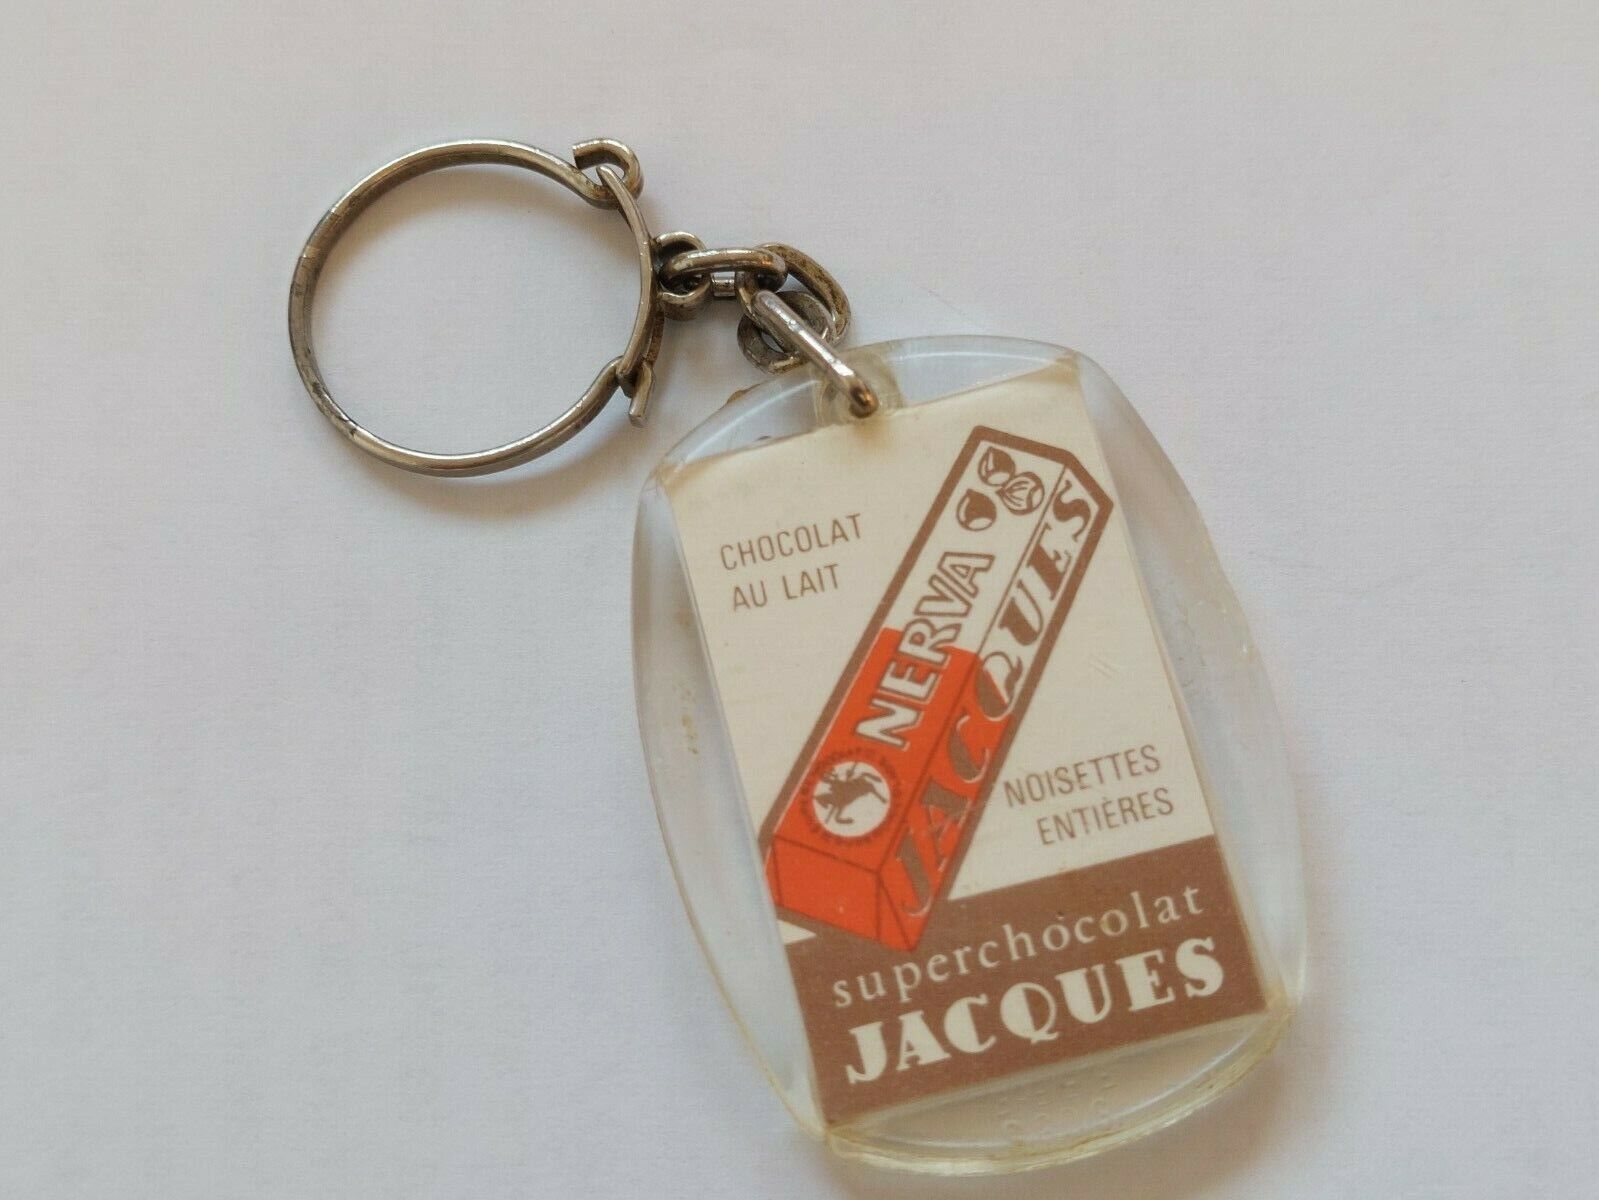  Nerva Jacques Superchocolat French Advertising Vintage 1960s Key chain